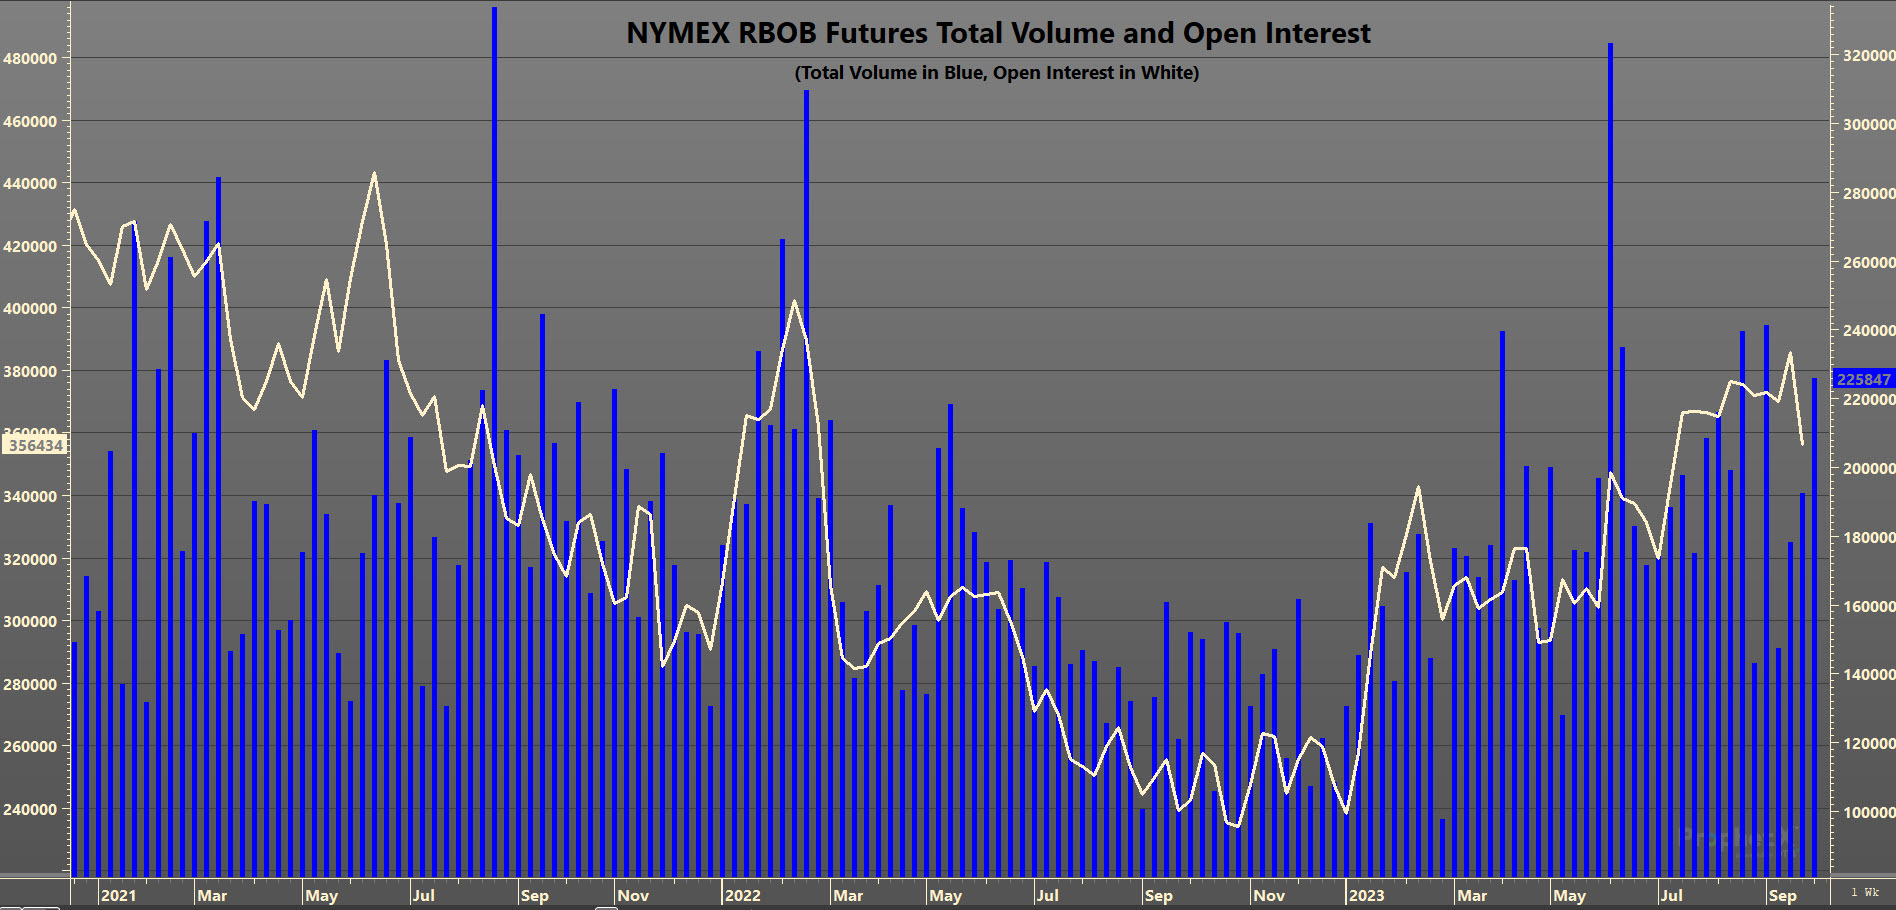 Graph of NYMEX RBOB Futures Total Volume and Open Interest